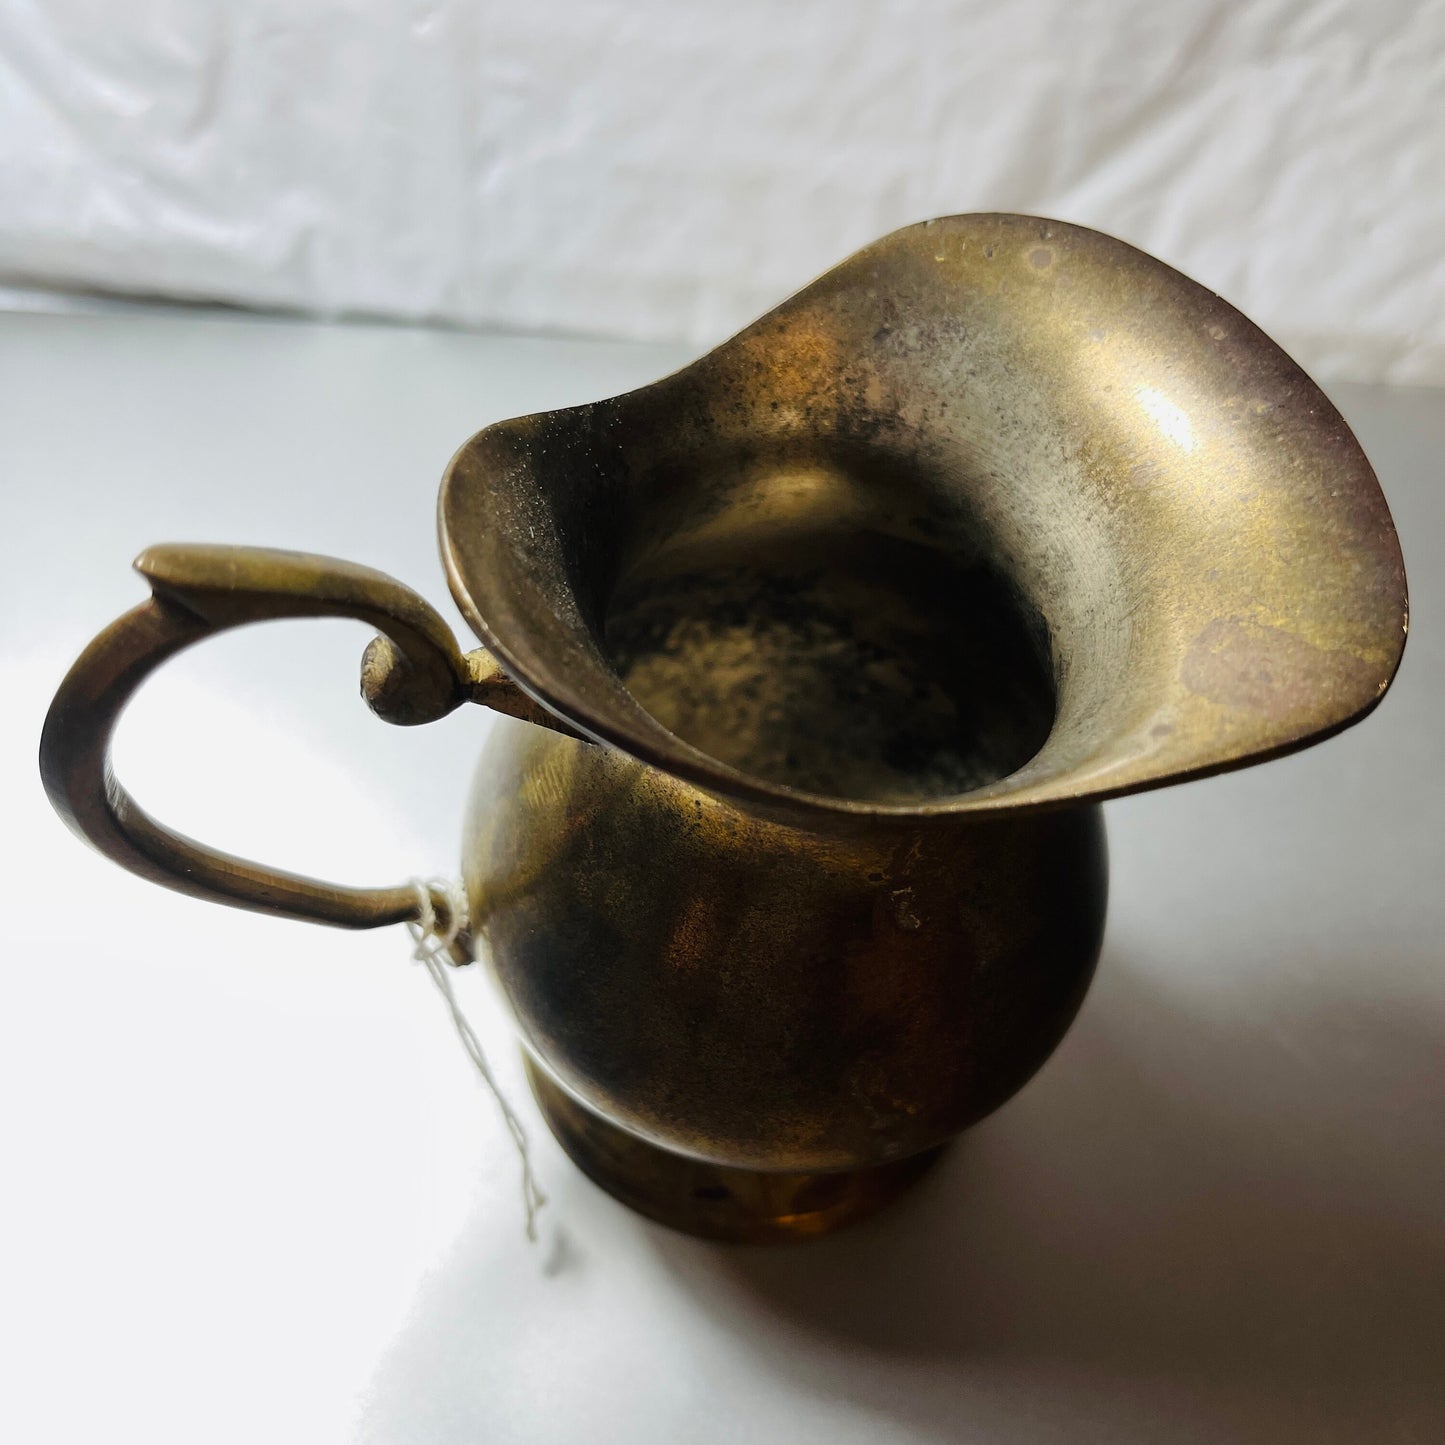 Small Brass Creamer/Syrup Pitcher, Vintage Decorative Collectible